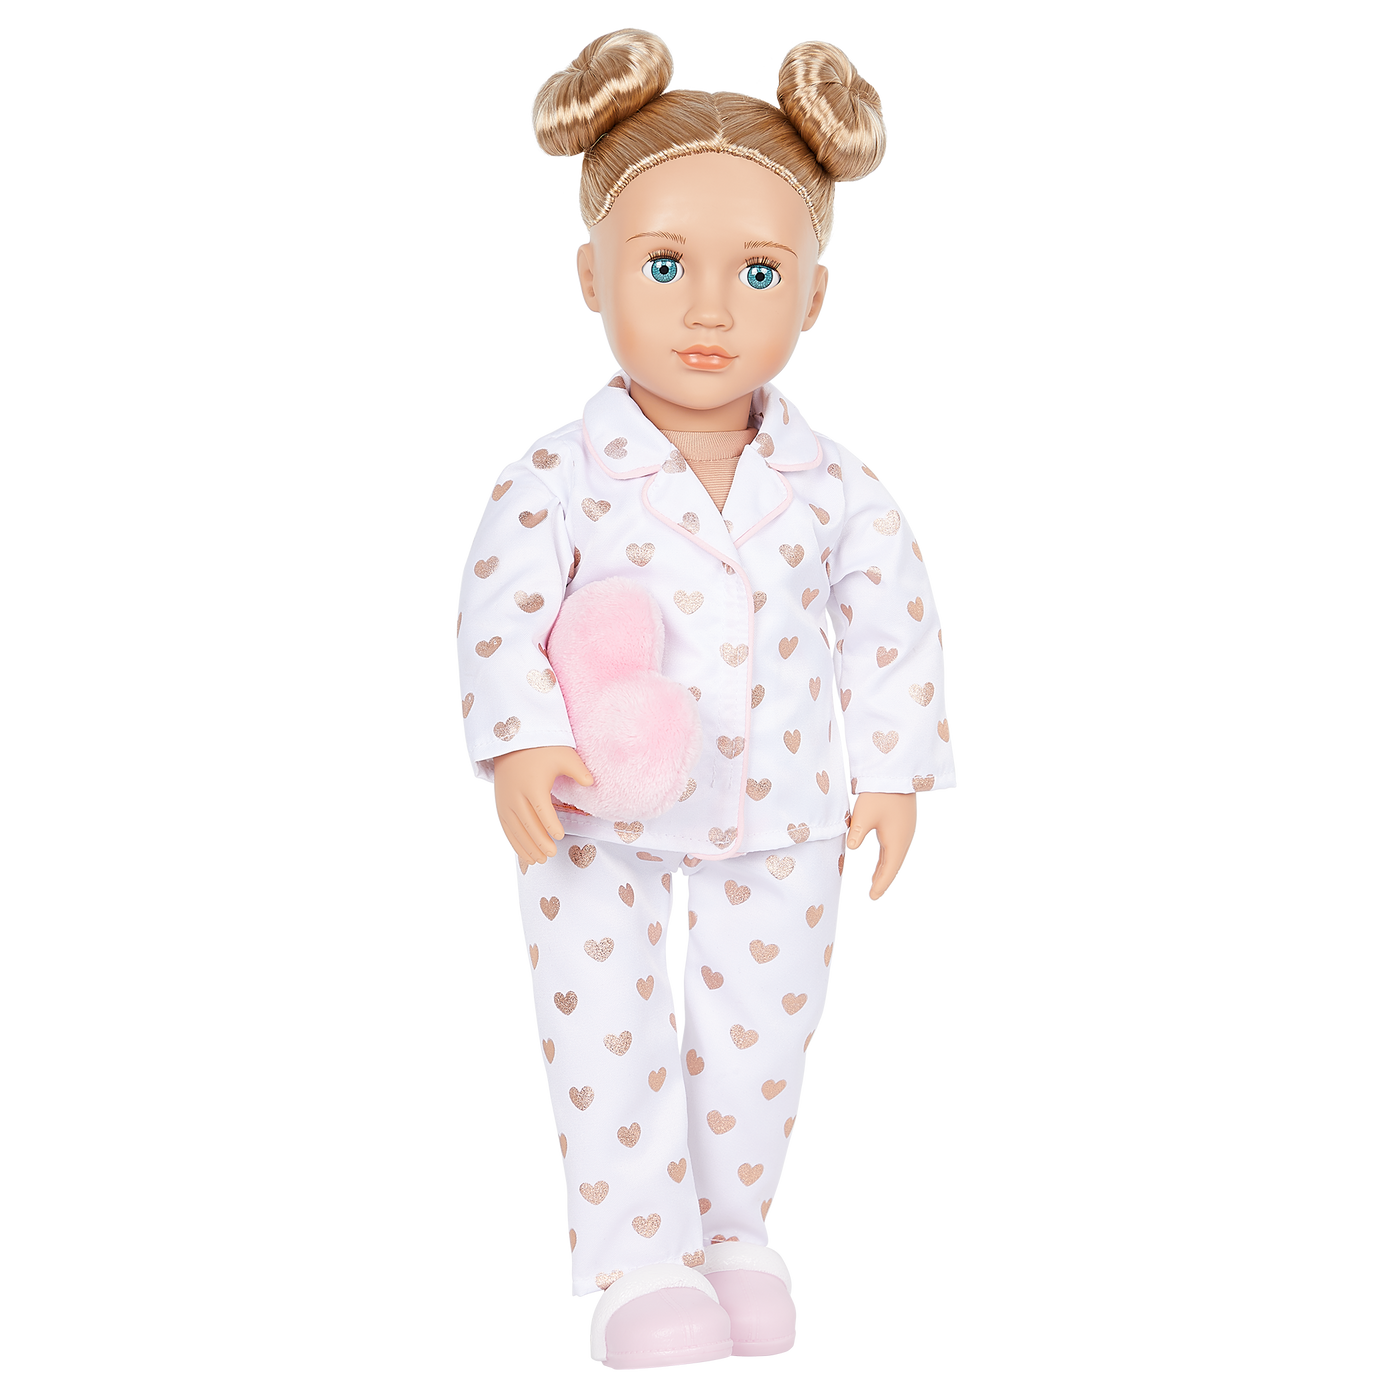 Our Generation 18-inch Slumber Party Doll Serenity